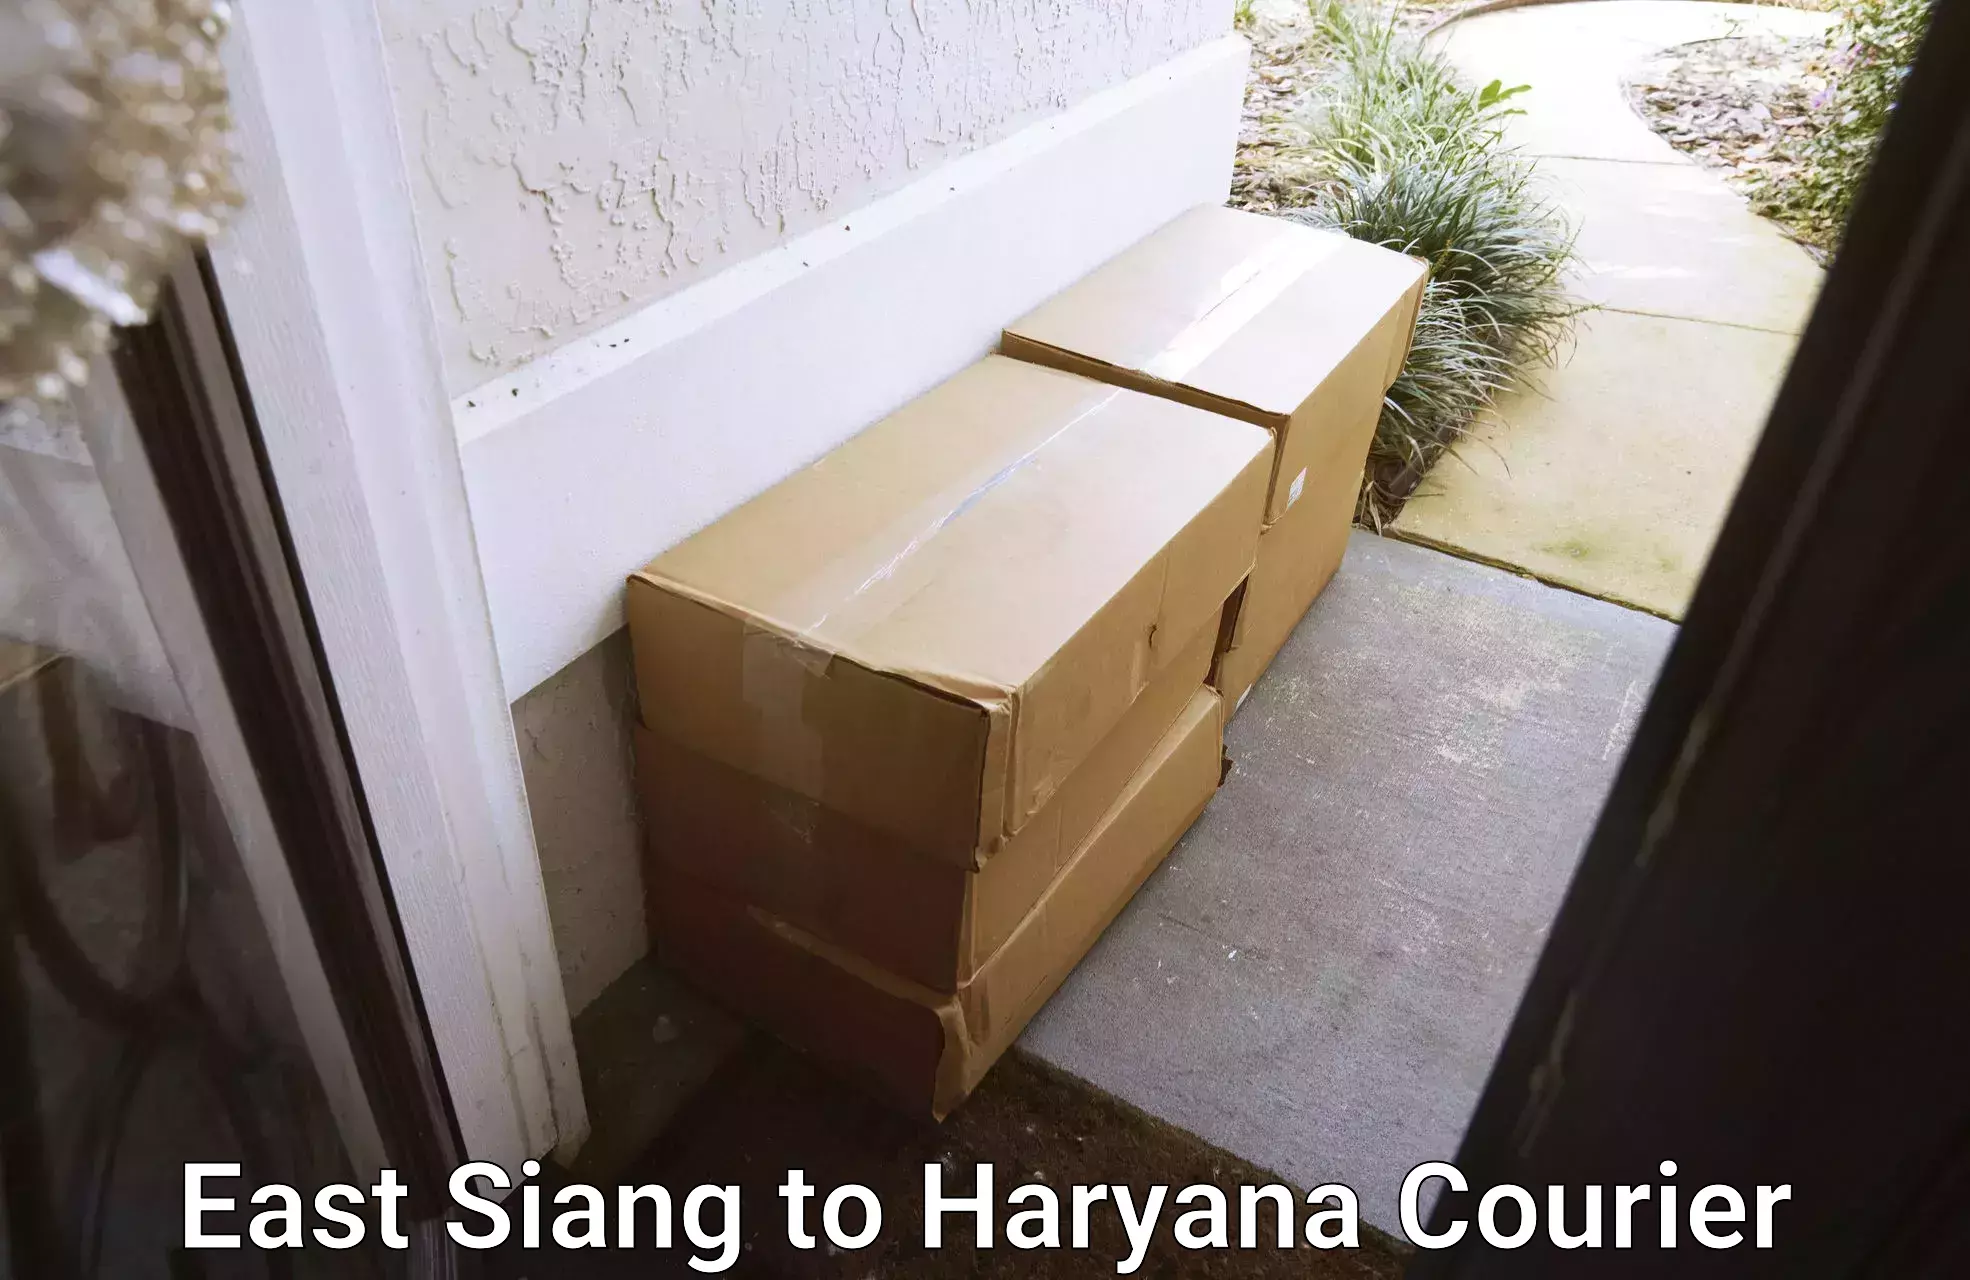 Reliable shipping partners East Siang to Haryana